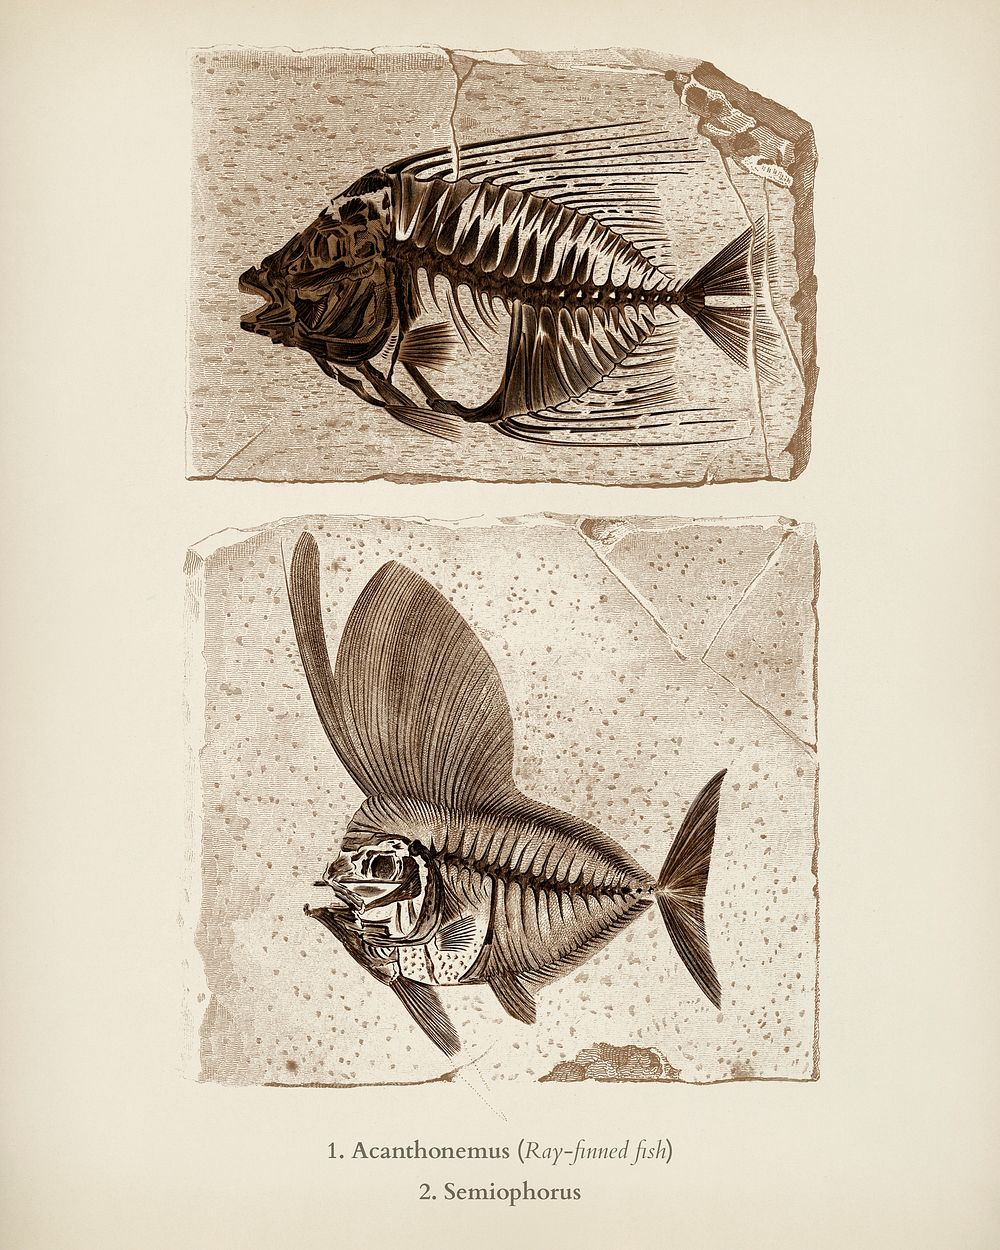 Ray-finned fish (Acanthonemus) and Semiophorus illustrated by Charles Dessalines D' Orbigny (1806-1876). Digitally enhanced…